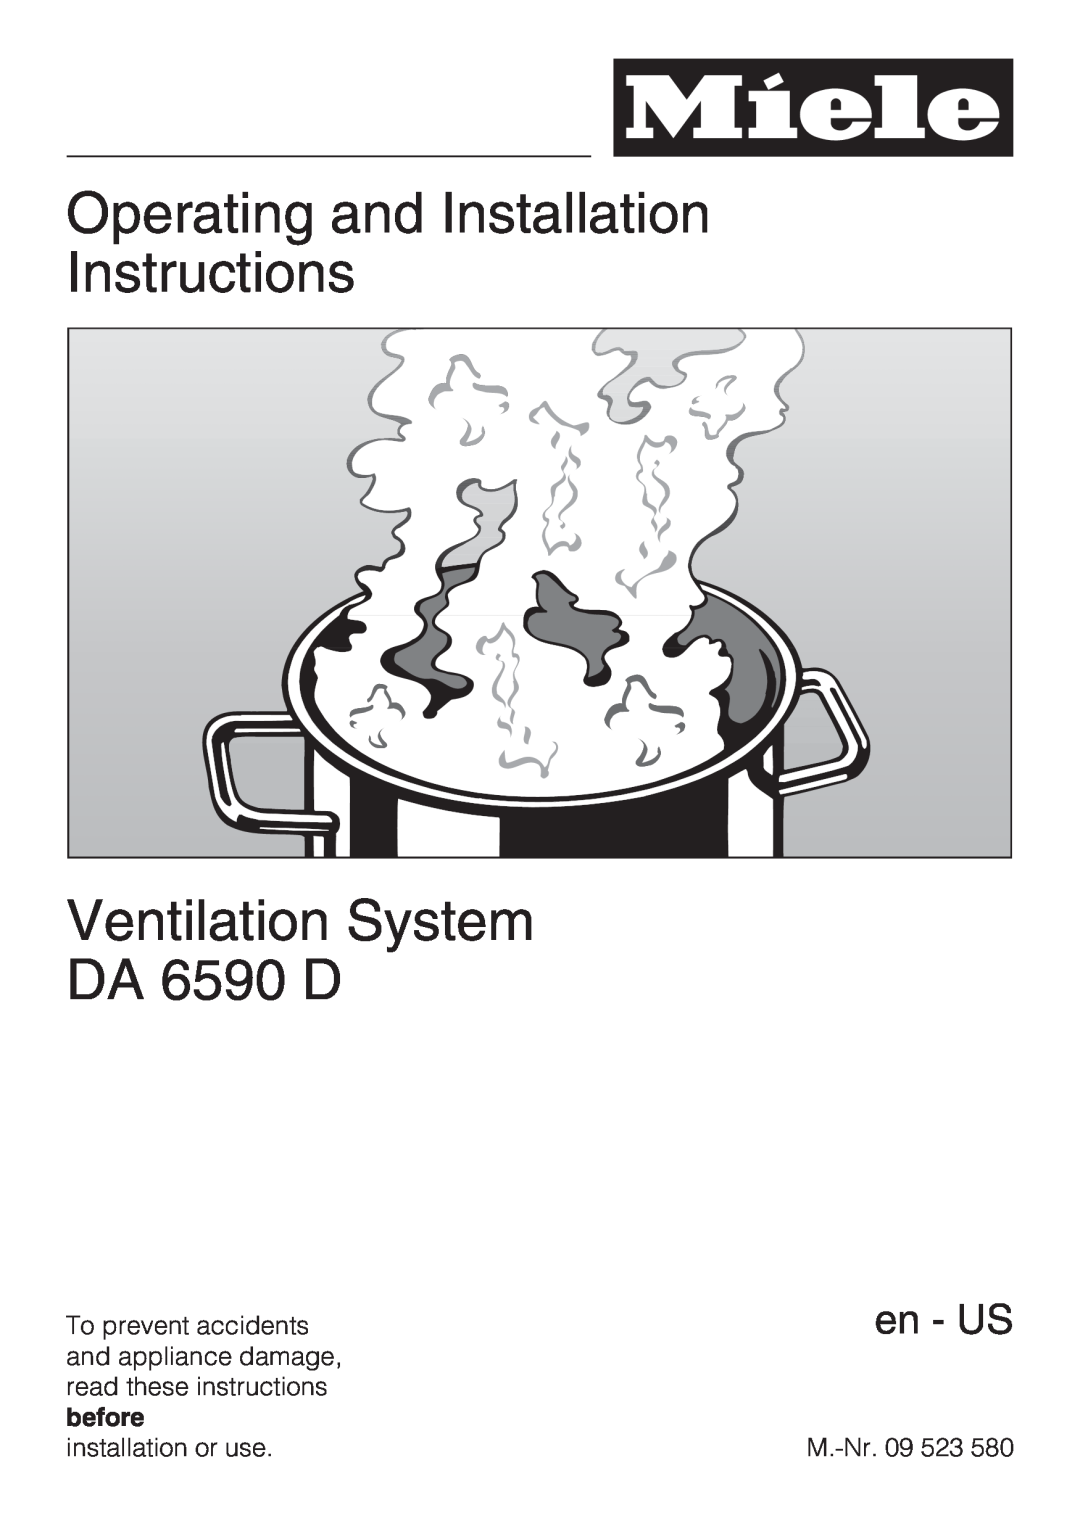 Miele installation instructions Operating and Installation Instructions, Ventilation System DA 6590 D, en - US 